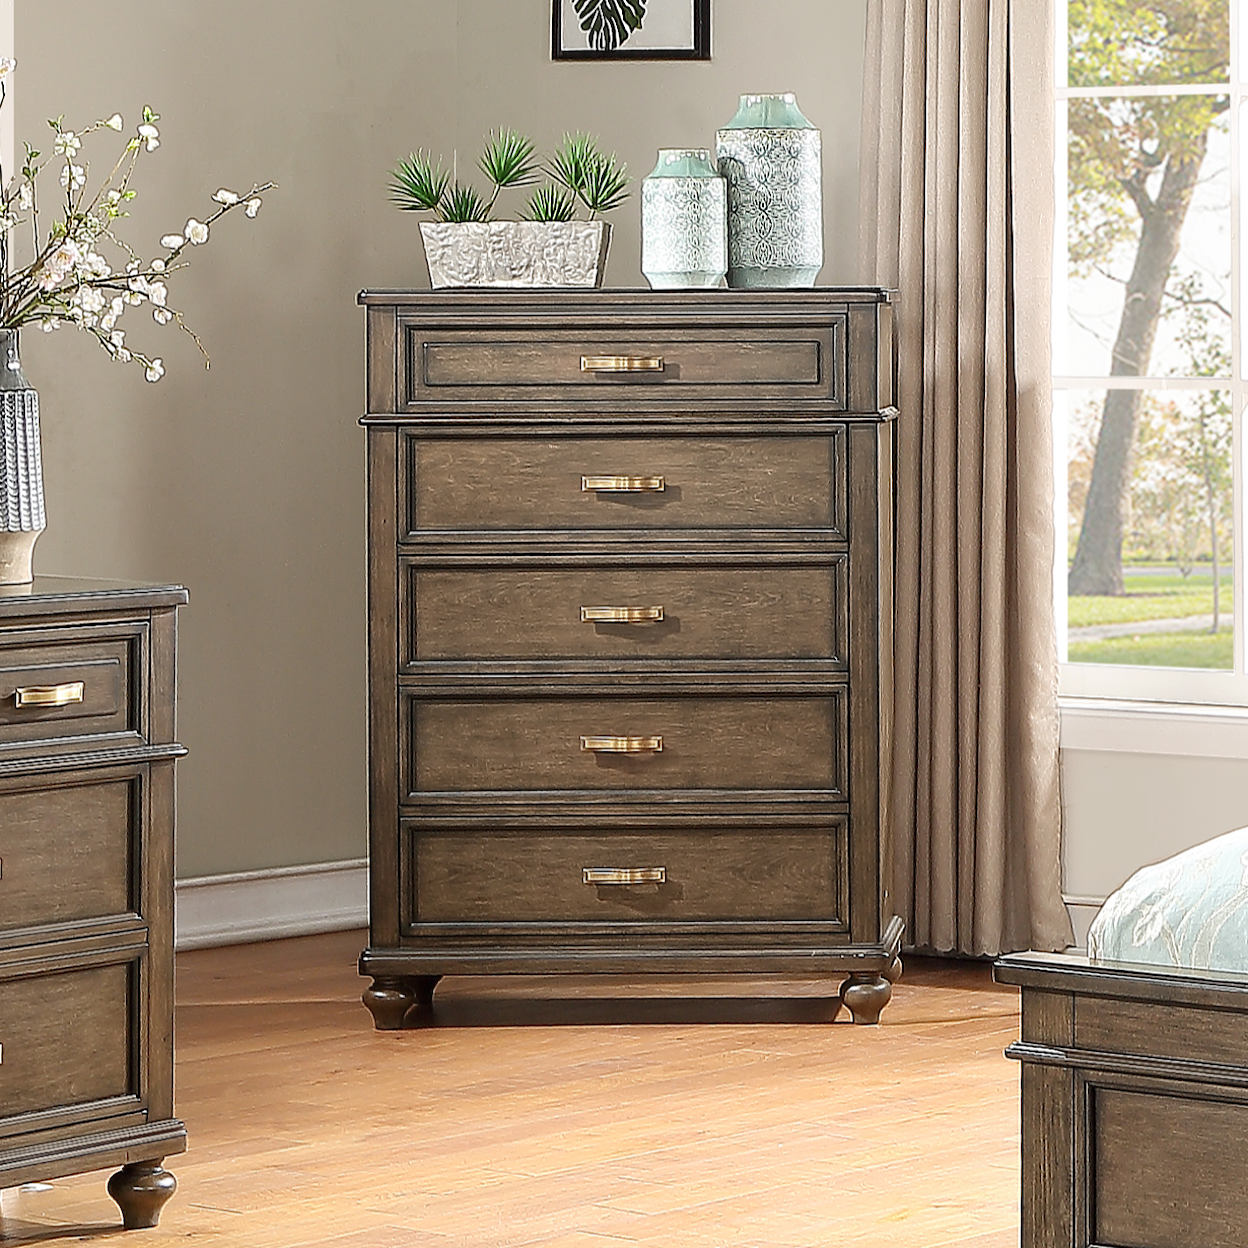 New Classic Furniture Canterbury Bedroom Chest